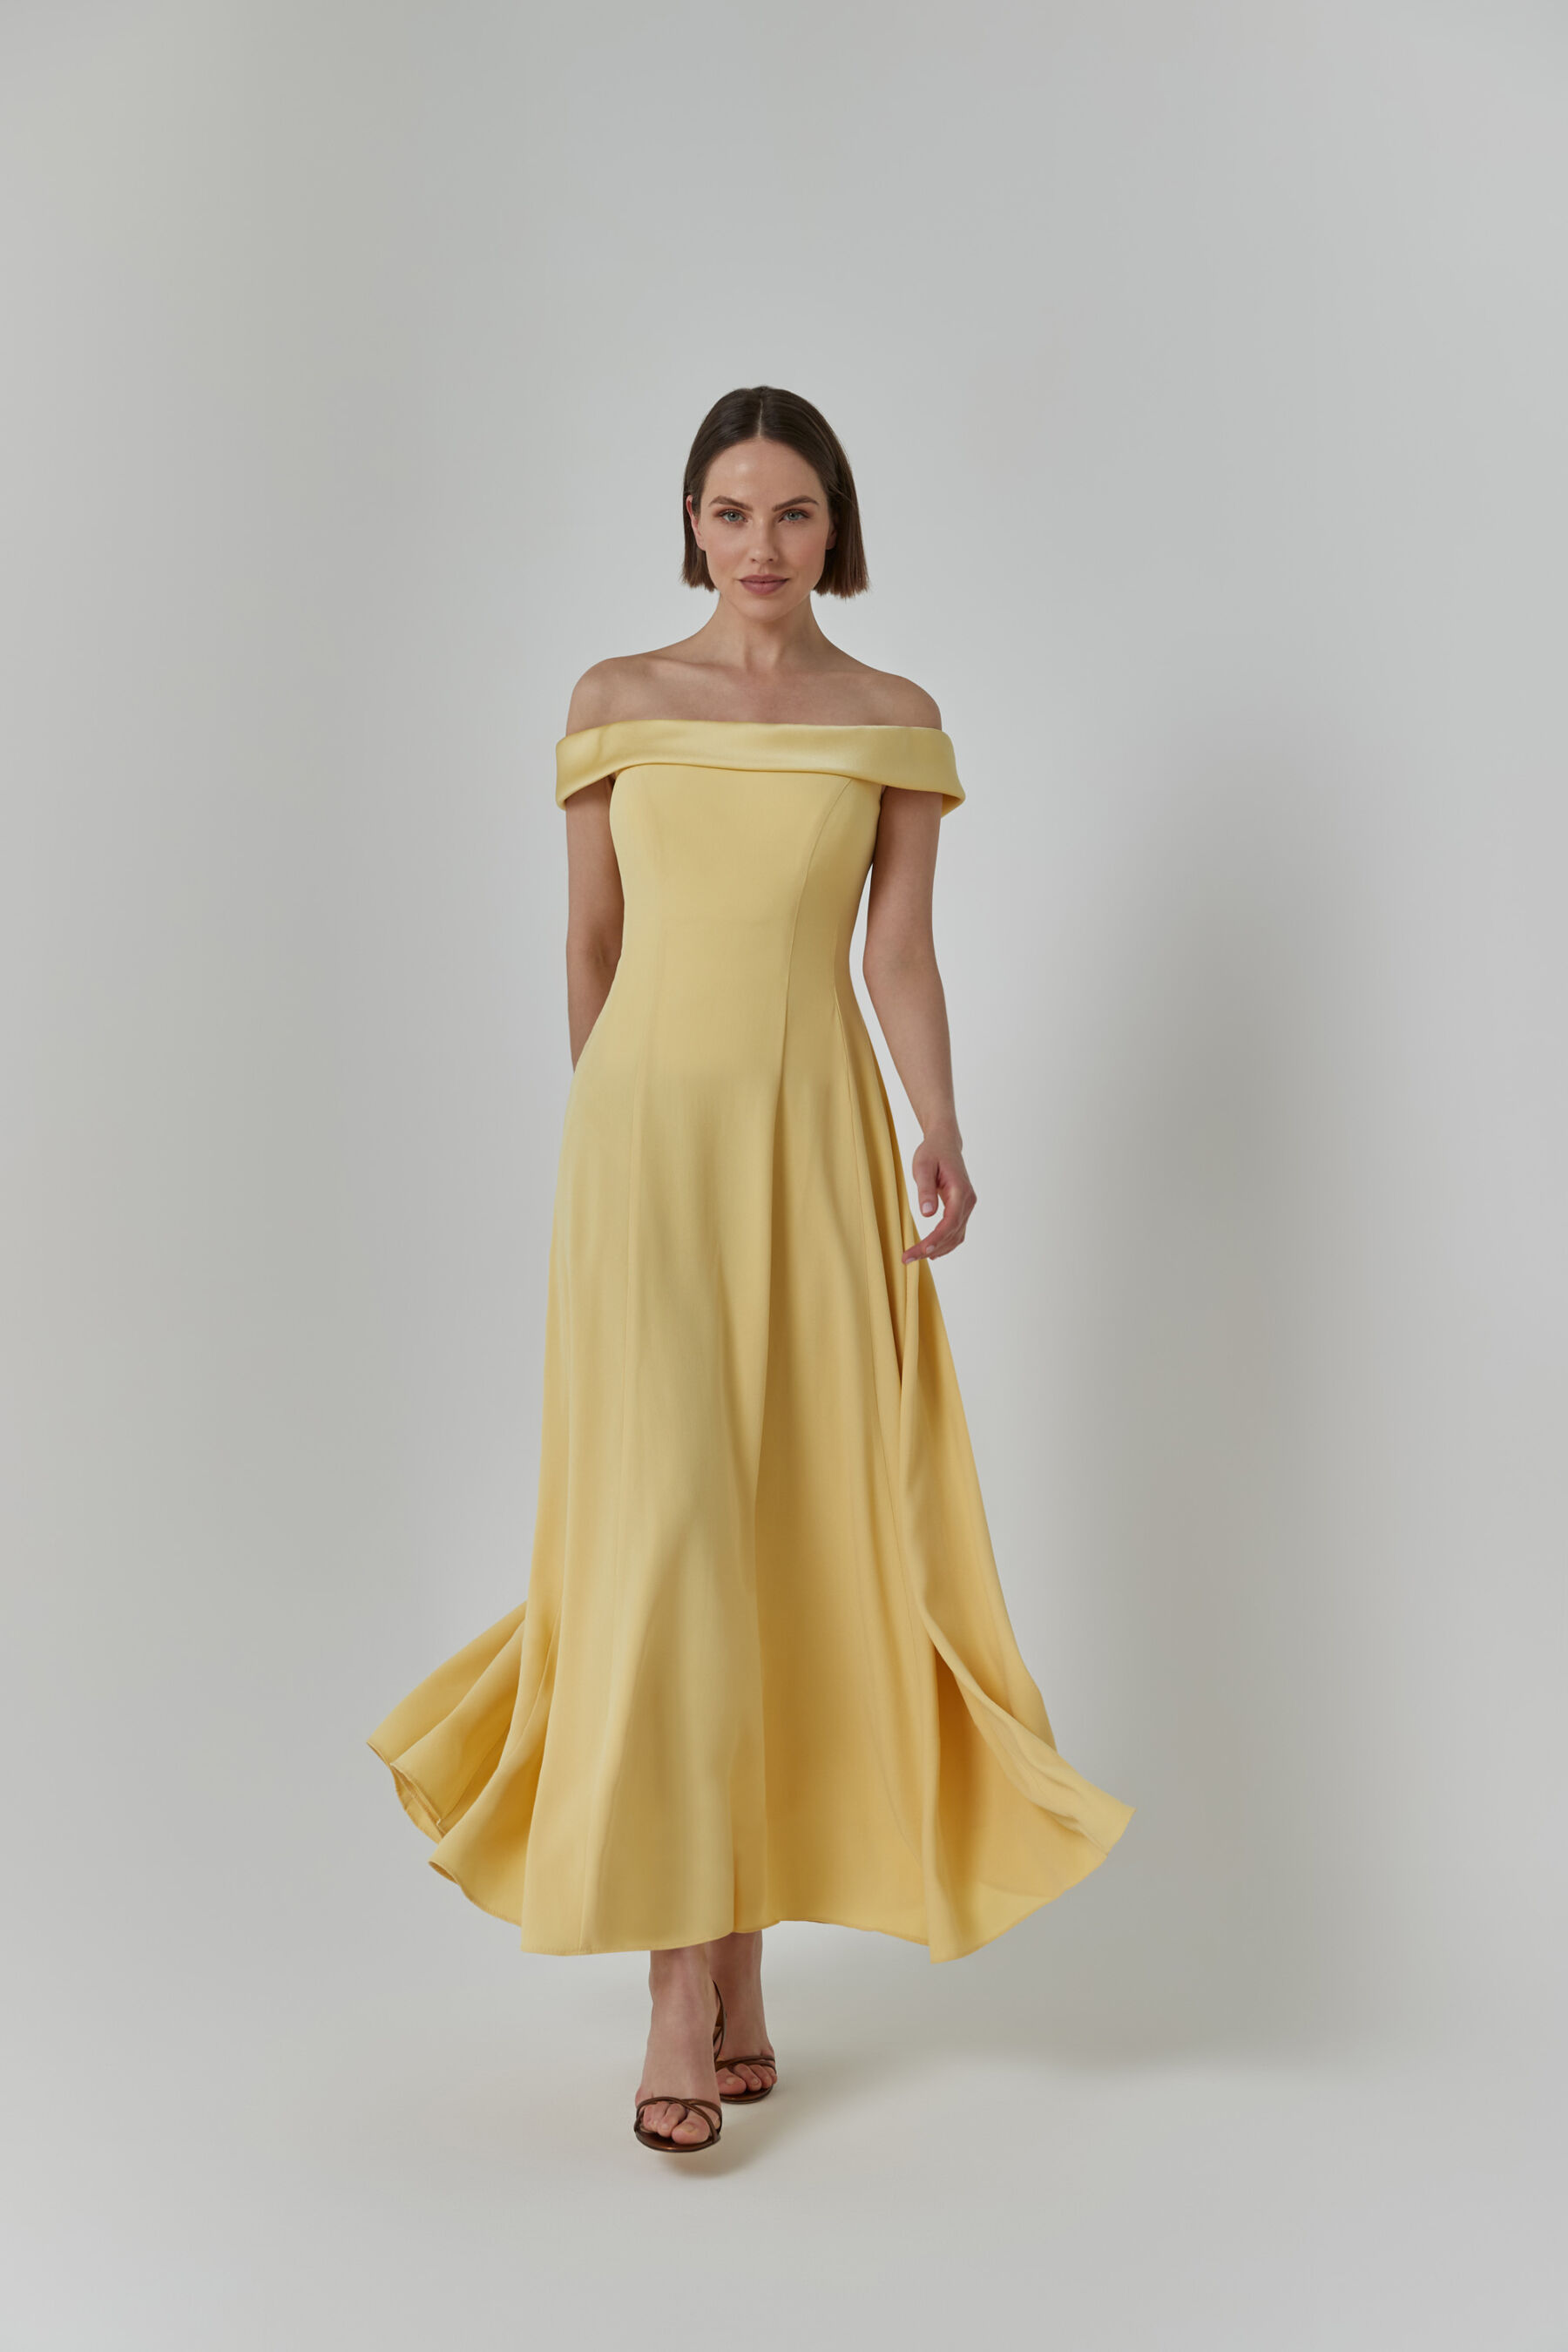 Yellow mother of the bride dress.